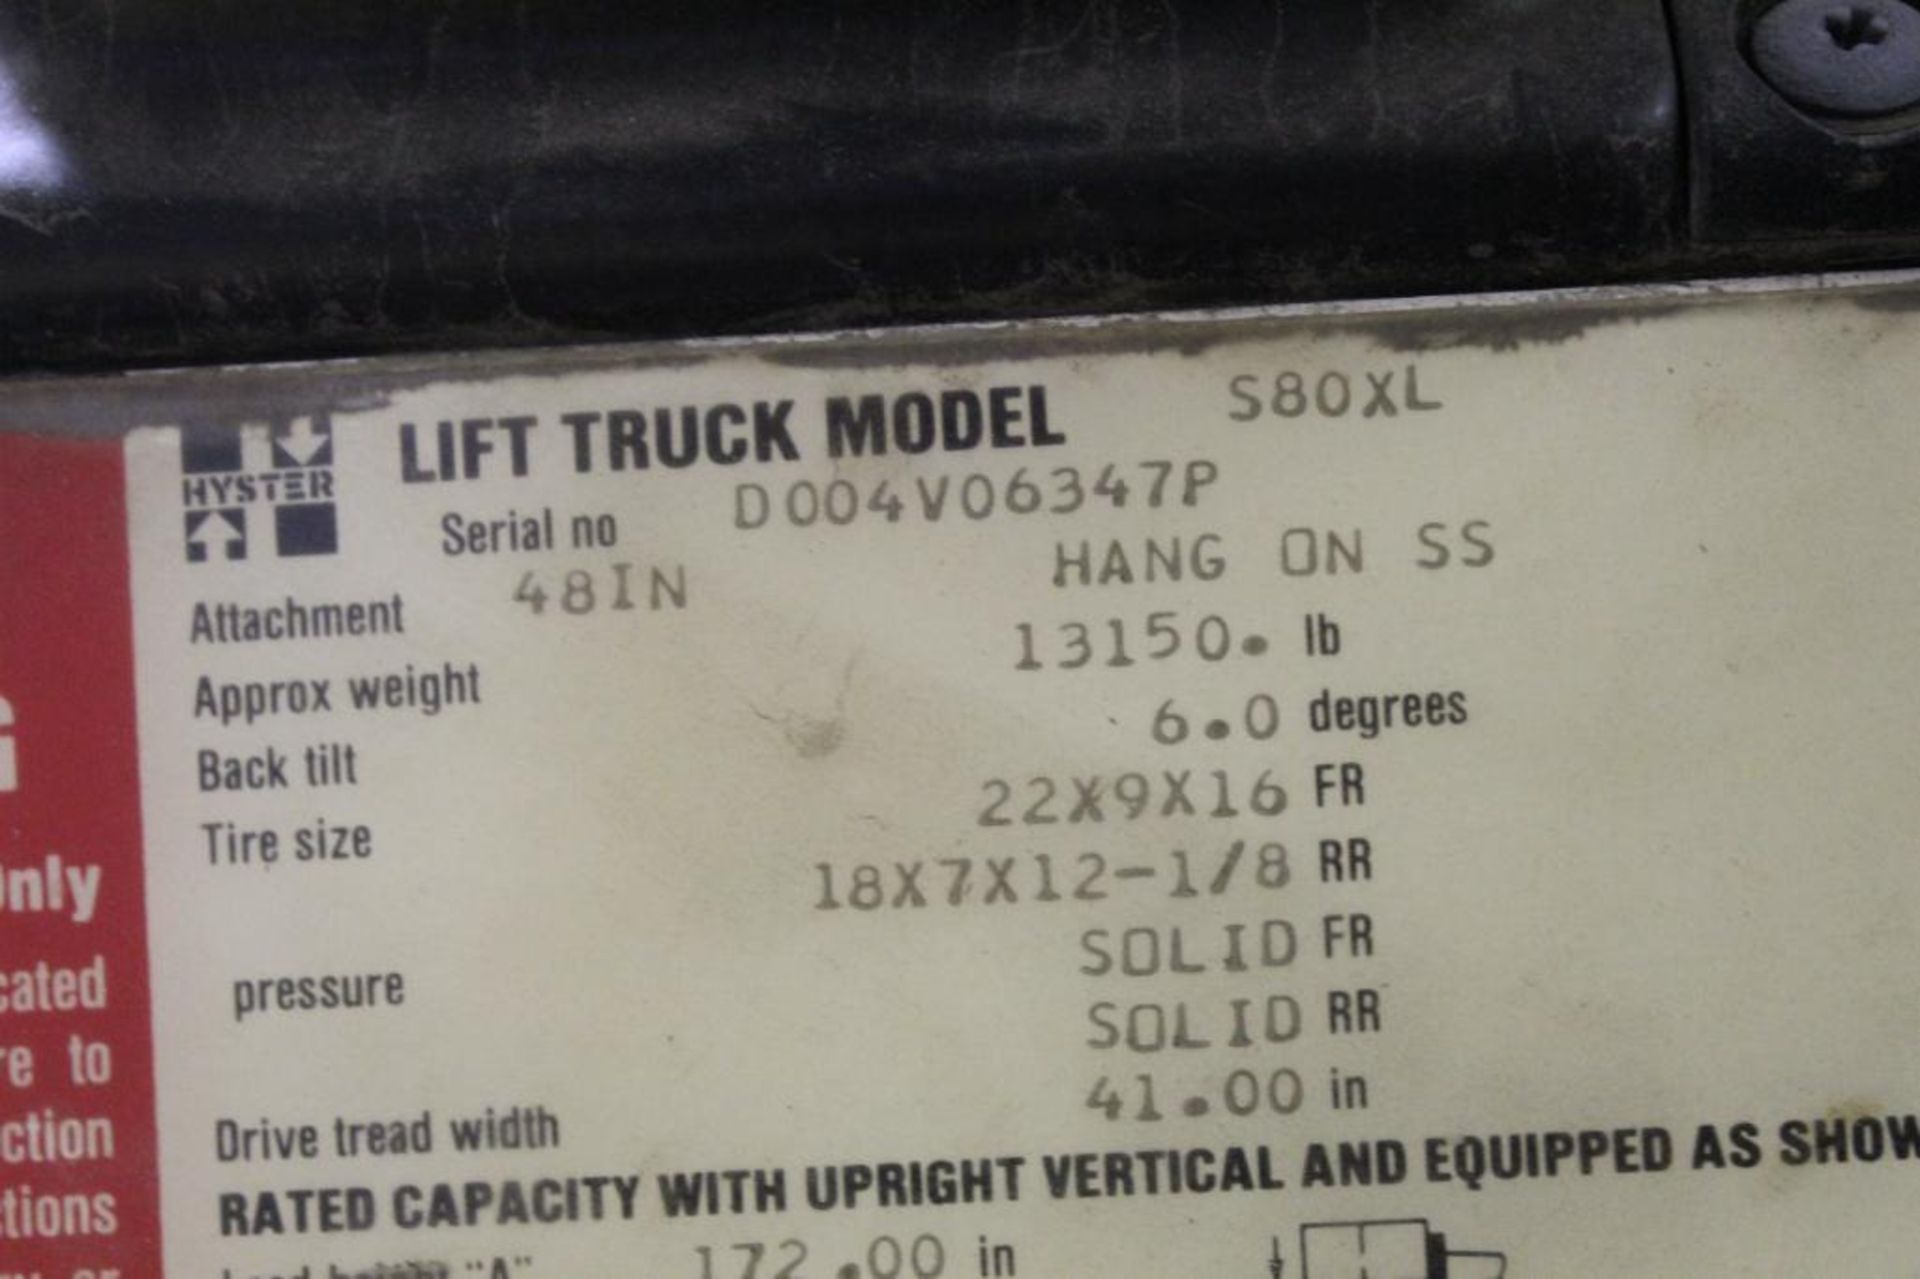 Hyster XL2 Forklift Model S80XL 8,000LB Capacity - Image 10 of 18